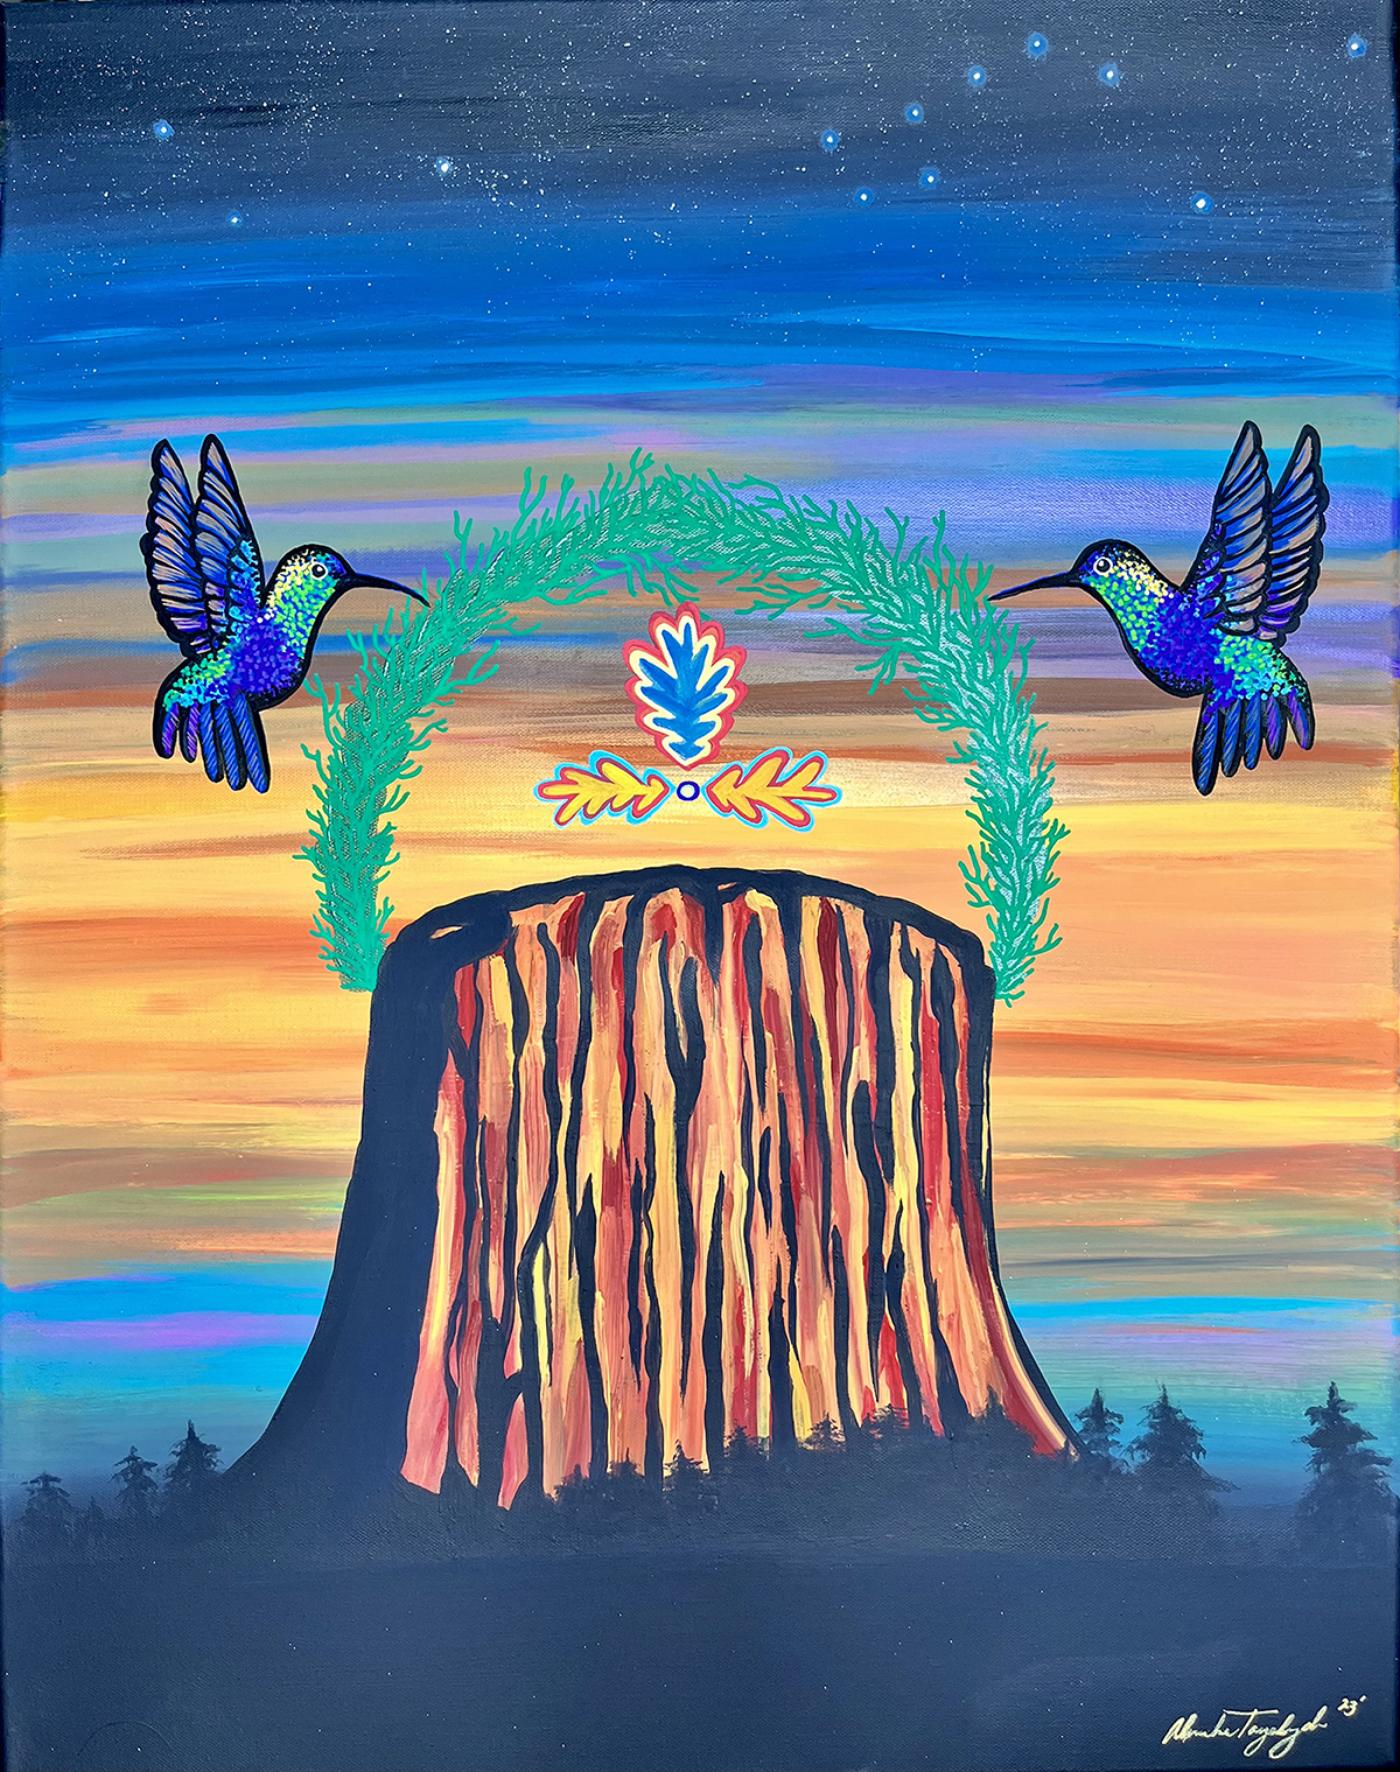 Painting showing two hummingbirds on either side of a cedar arch, stretching over an oak leaf design. The devil’s tower in centered in the background, while the night sky shows the seven sisters constellation.